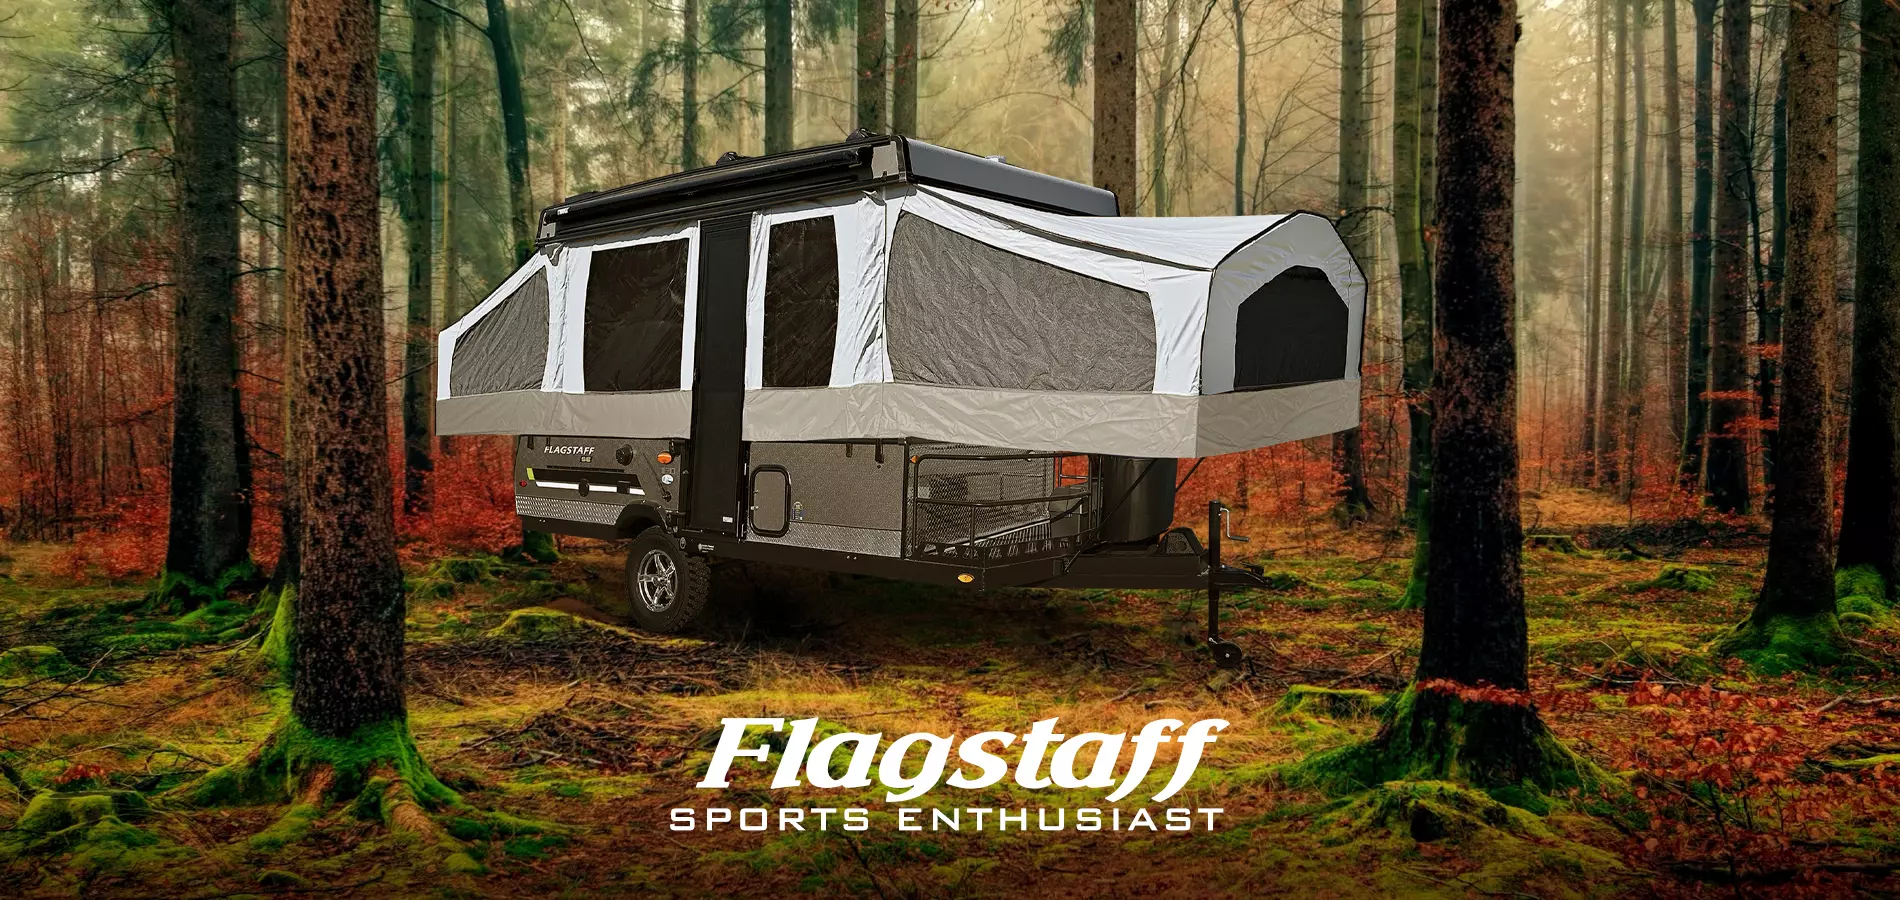 Flagstaff Sports Enthusiast Package Forest River Rv